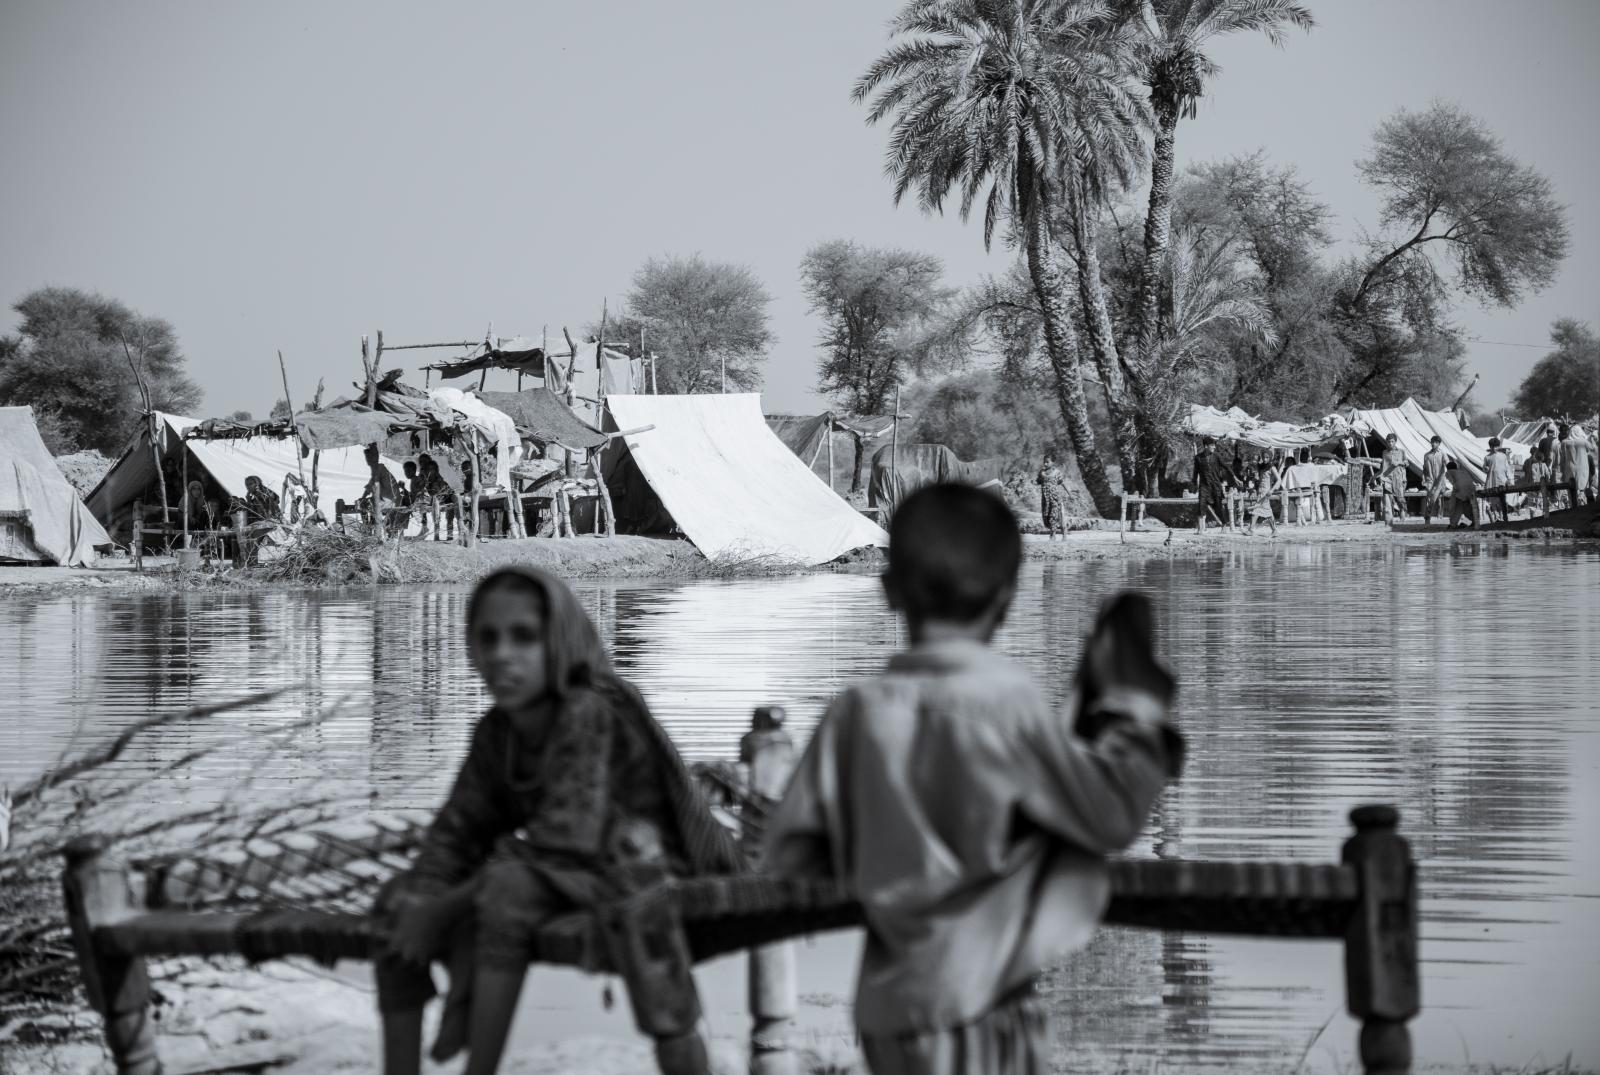 Discourses of Aftermath in Shikarpur | Buy this image